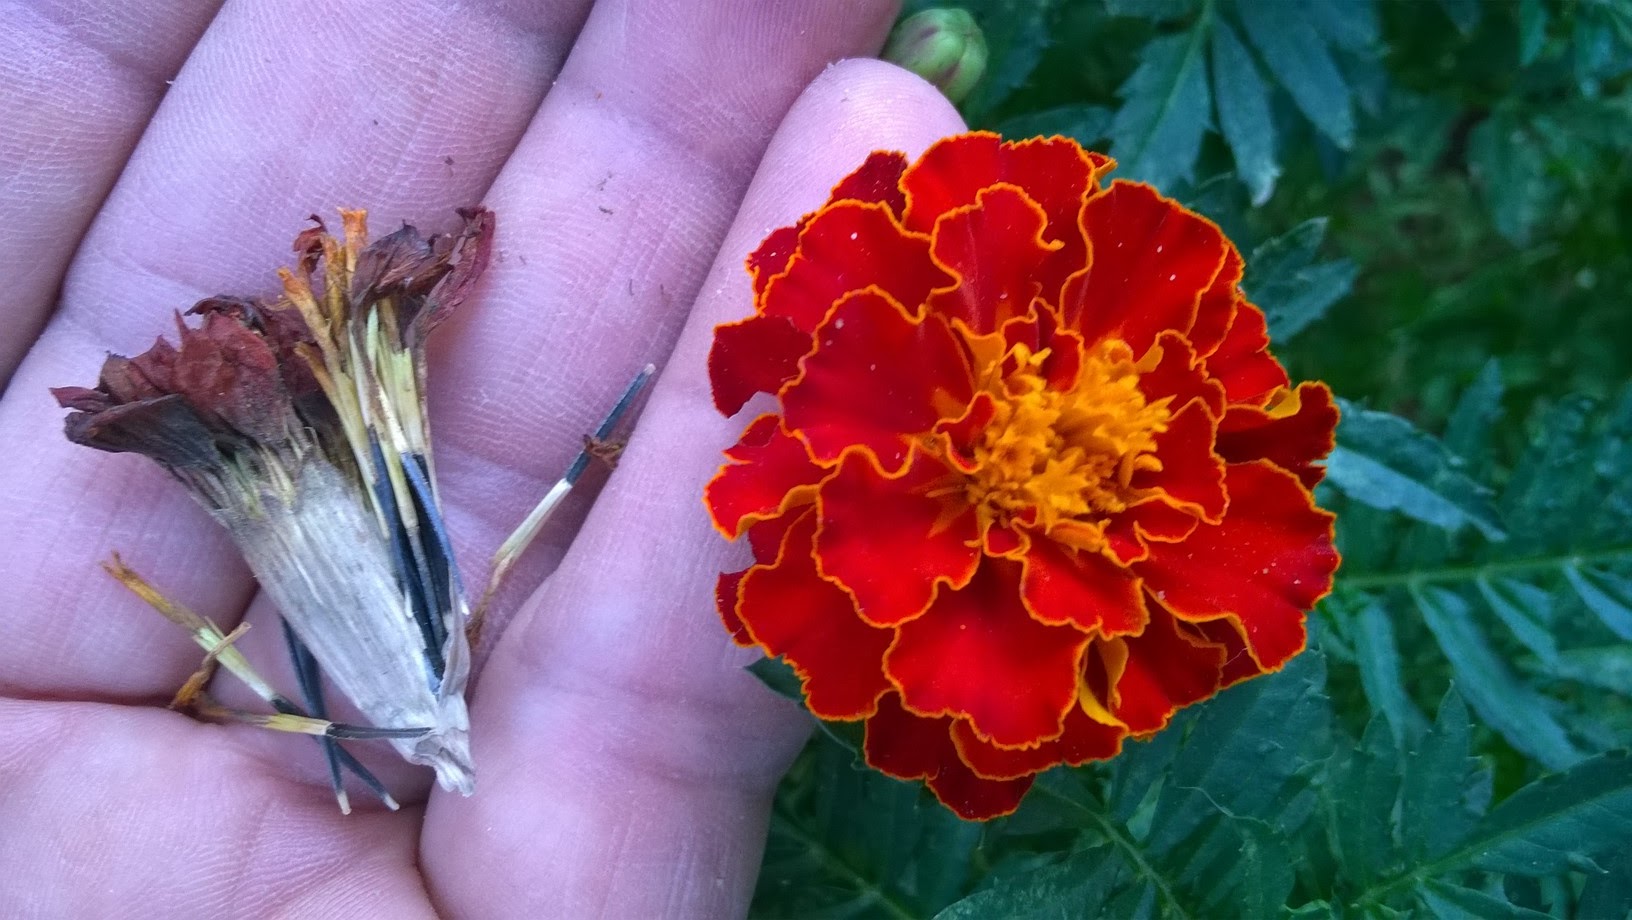 To get a jump on the season i recommend starting your marigold seeds indoors  They are low maintenance, fast growing, repel pests, and they will provide you with bright, continuous color until the fall frost.